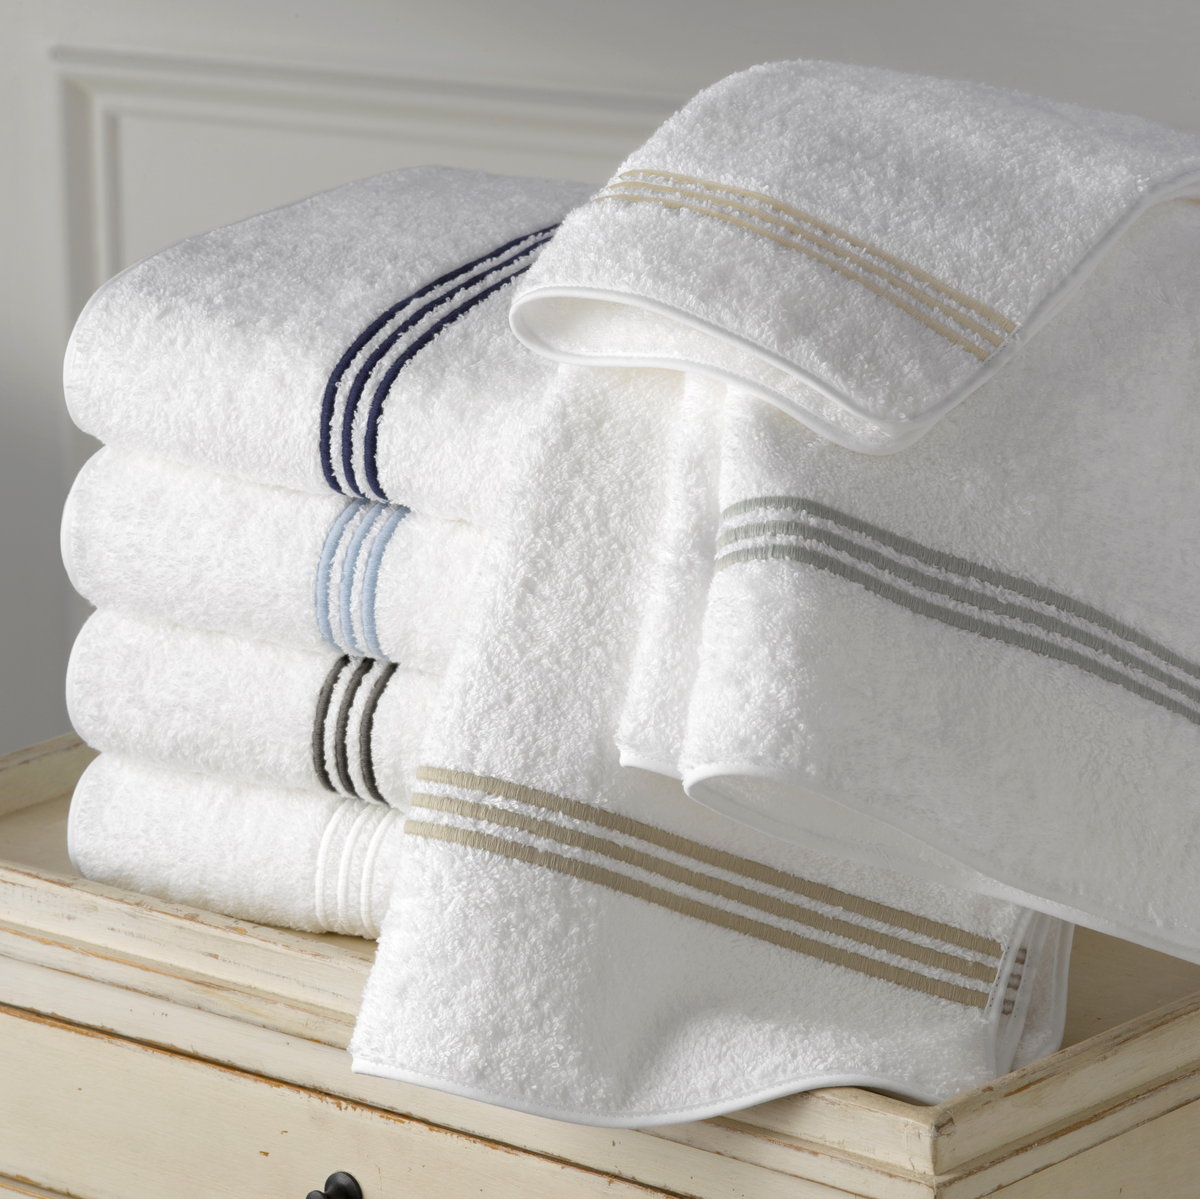 Matouk Bel Tempo Bath Towels Mat Folded and Stacked